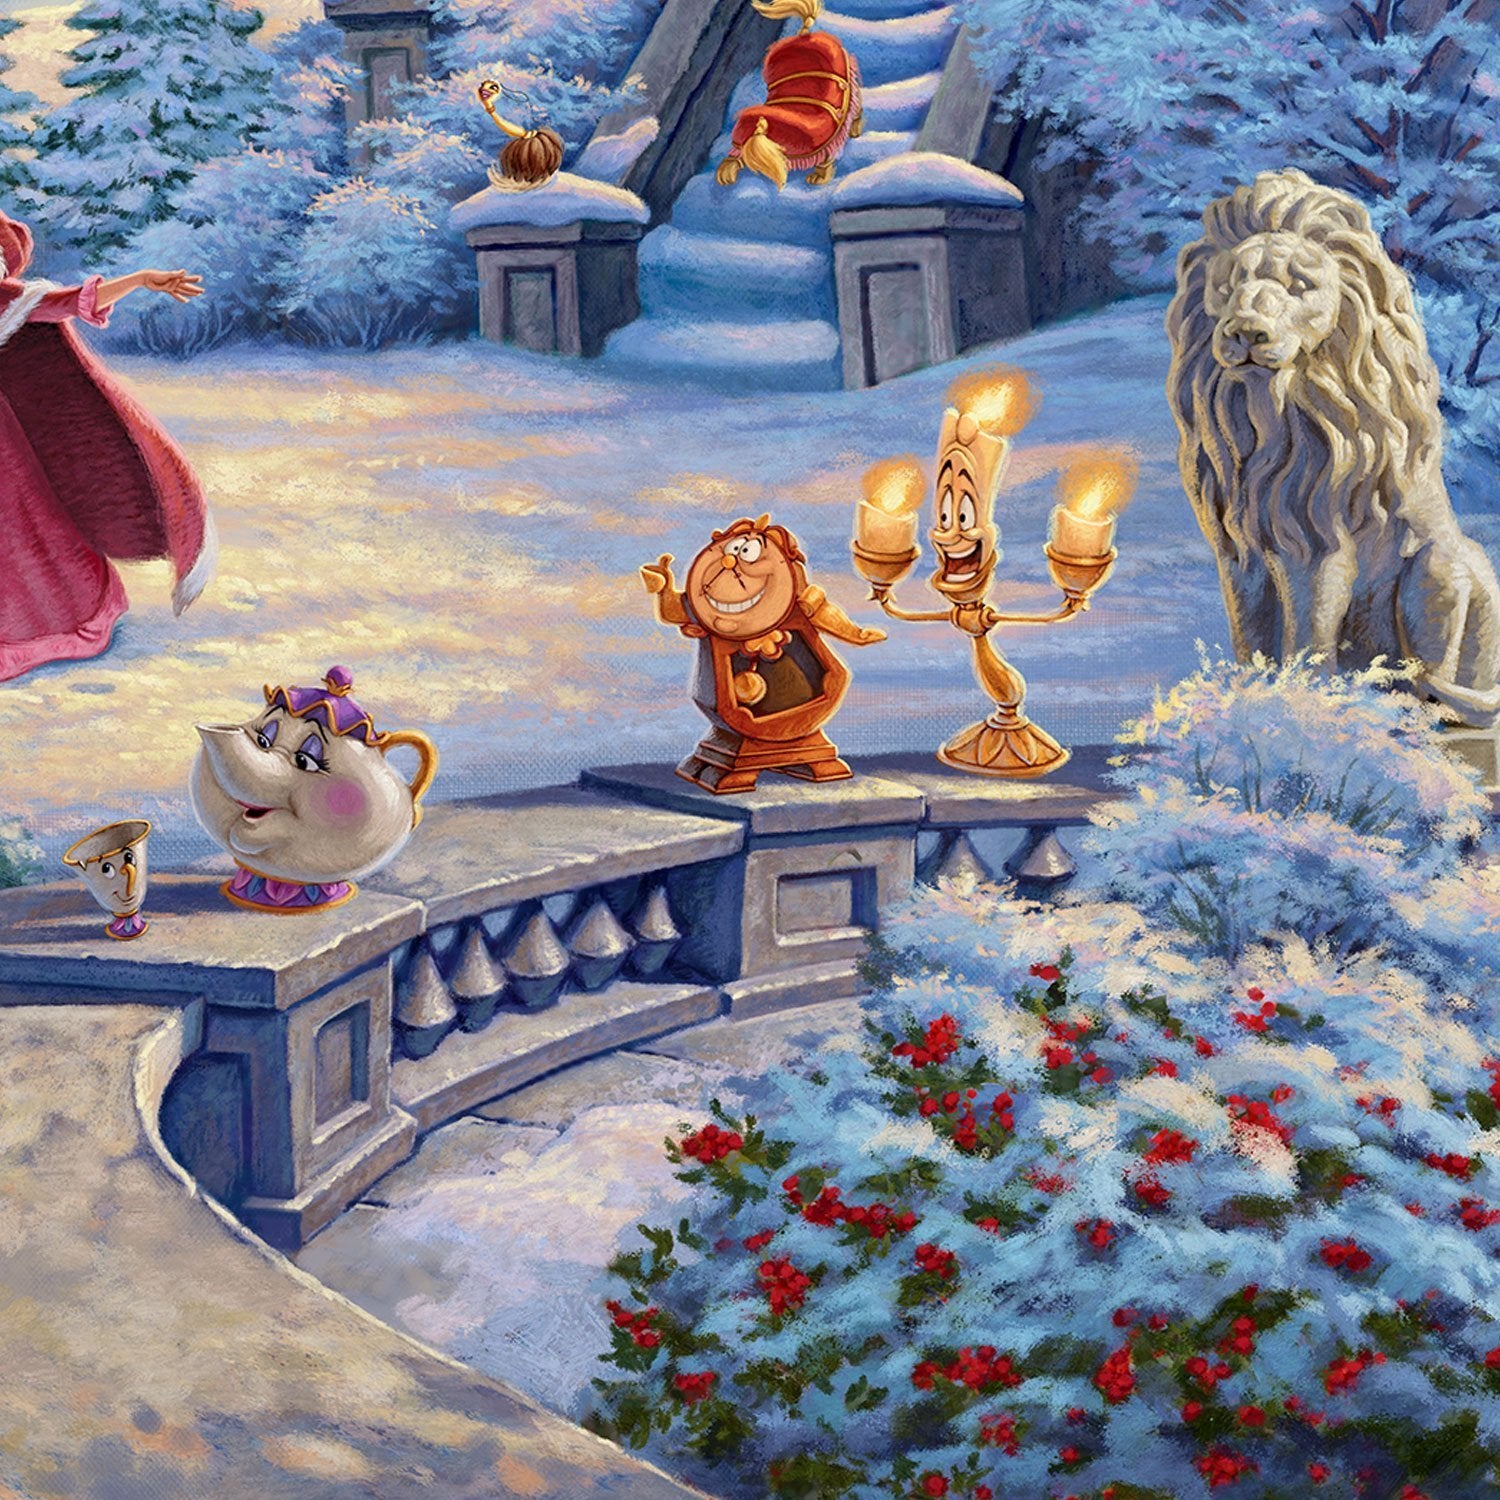  Beauty and the Beast's Winter Enchantment - Closeup 4